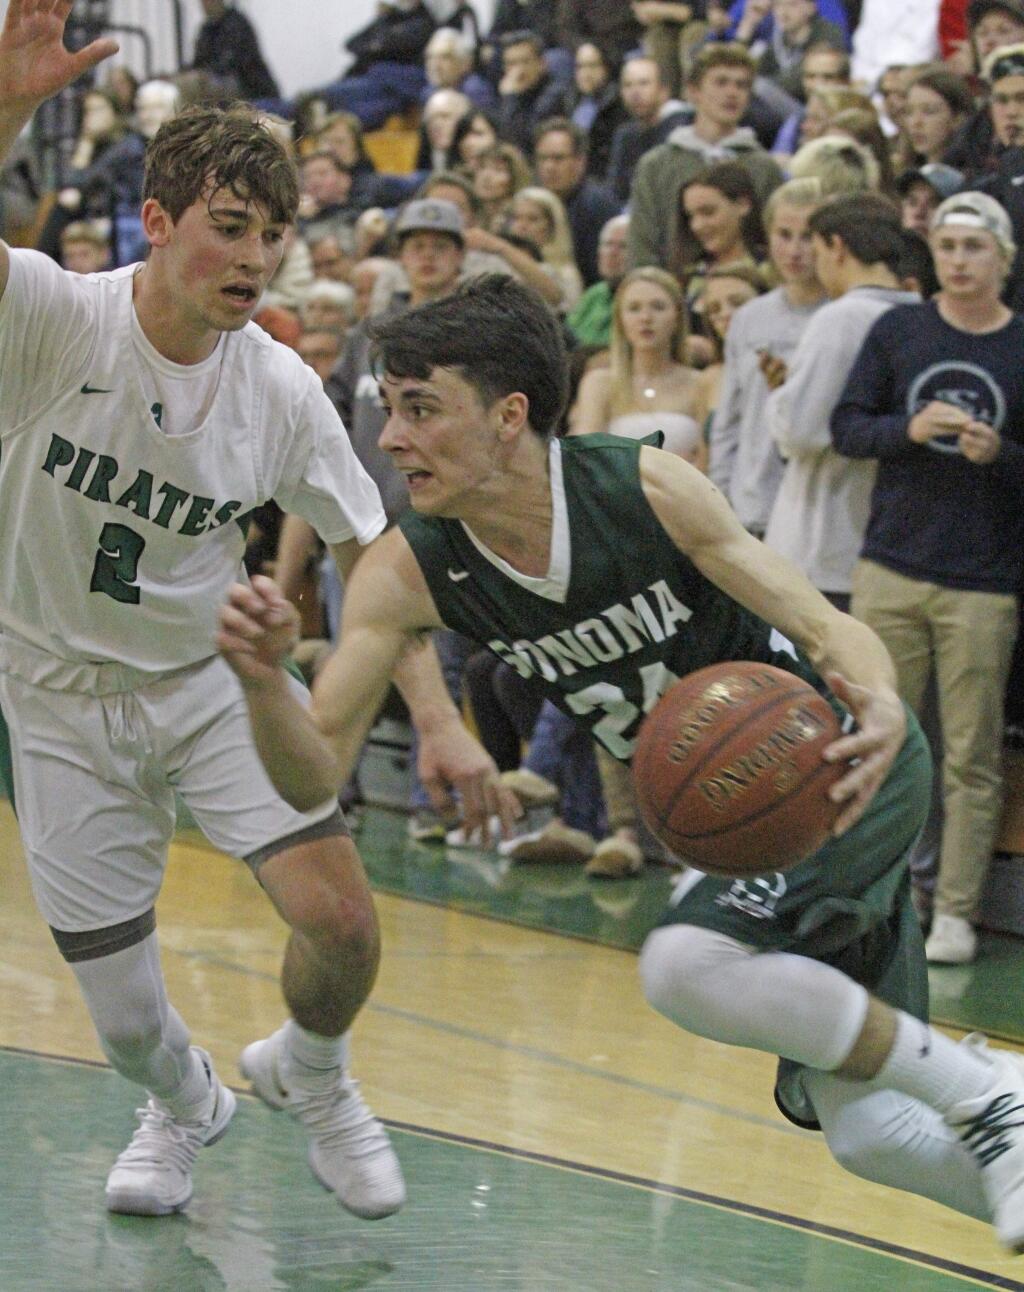 Bill Hoban/Index-TribuneSonoma's Dylan Samaniego tries to get around a Drake player Tuesday in the opening round of the North Coast Section Tournament.